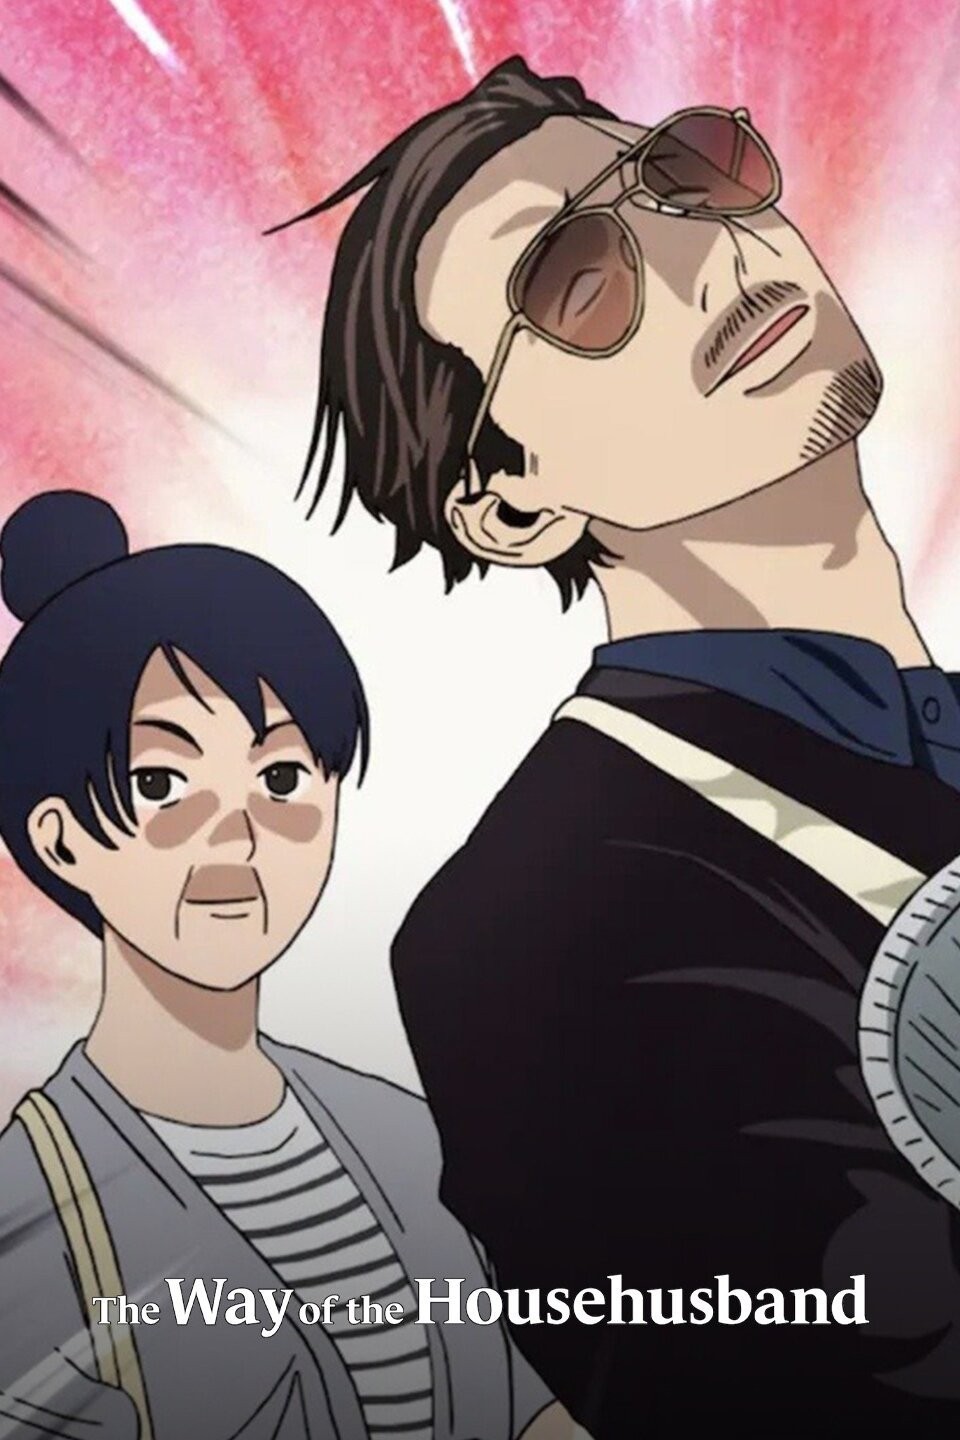 Anime-Planet - The Way of the Househusband is now available to stream on  Netflix worldwide! ✨ Add it to your list: https://www.anime-planet.com/anime/the-way-of-the-househusband  | Facebook